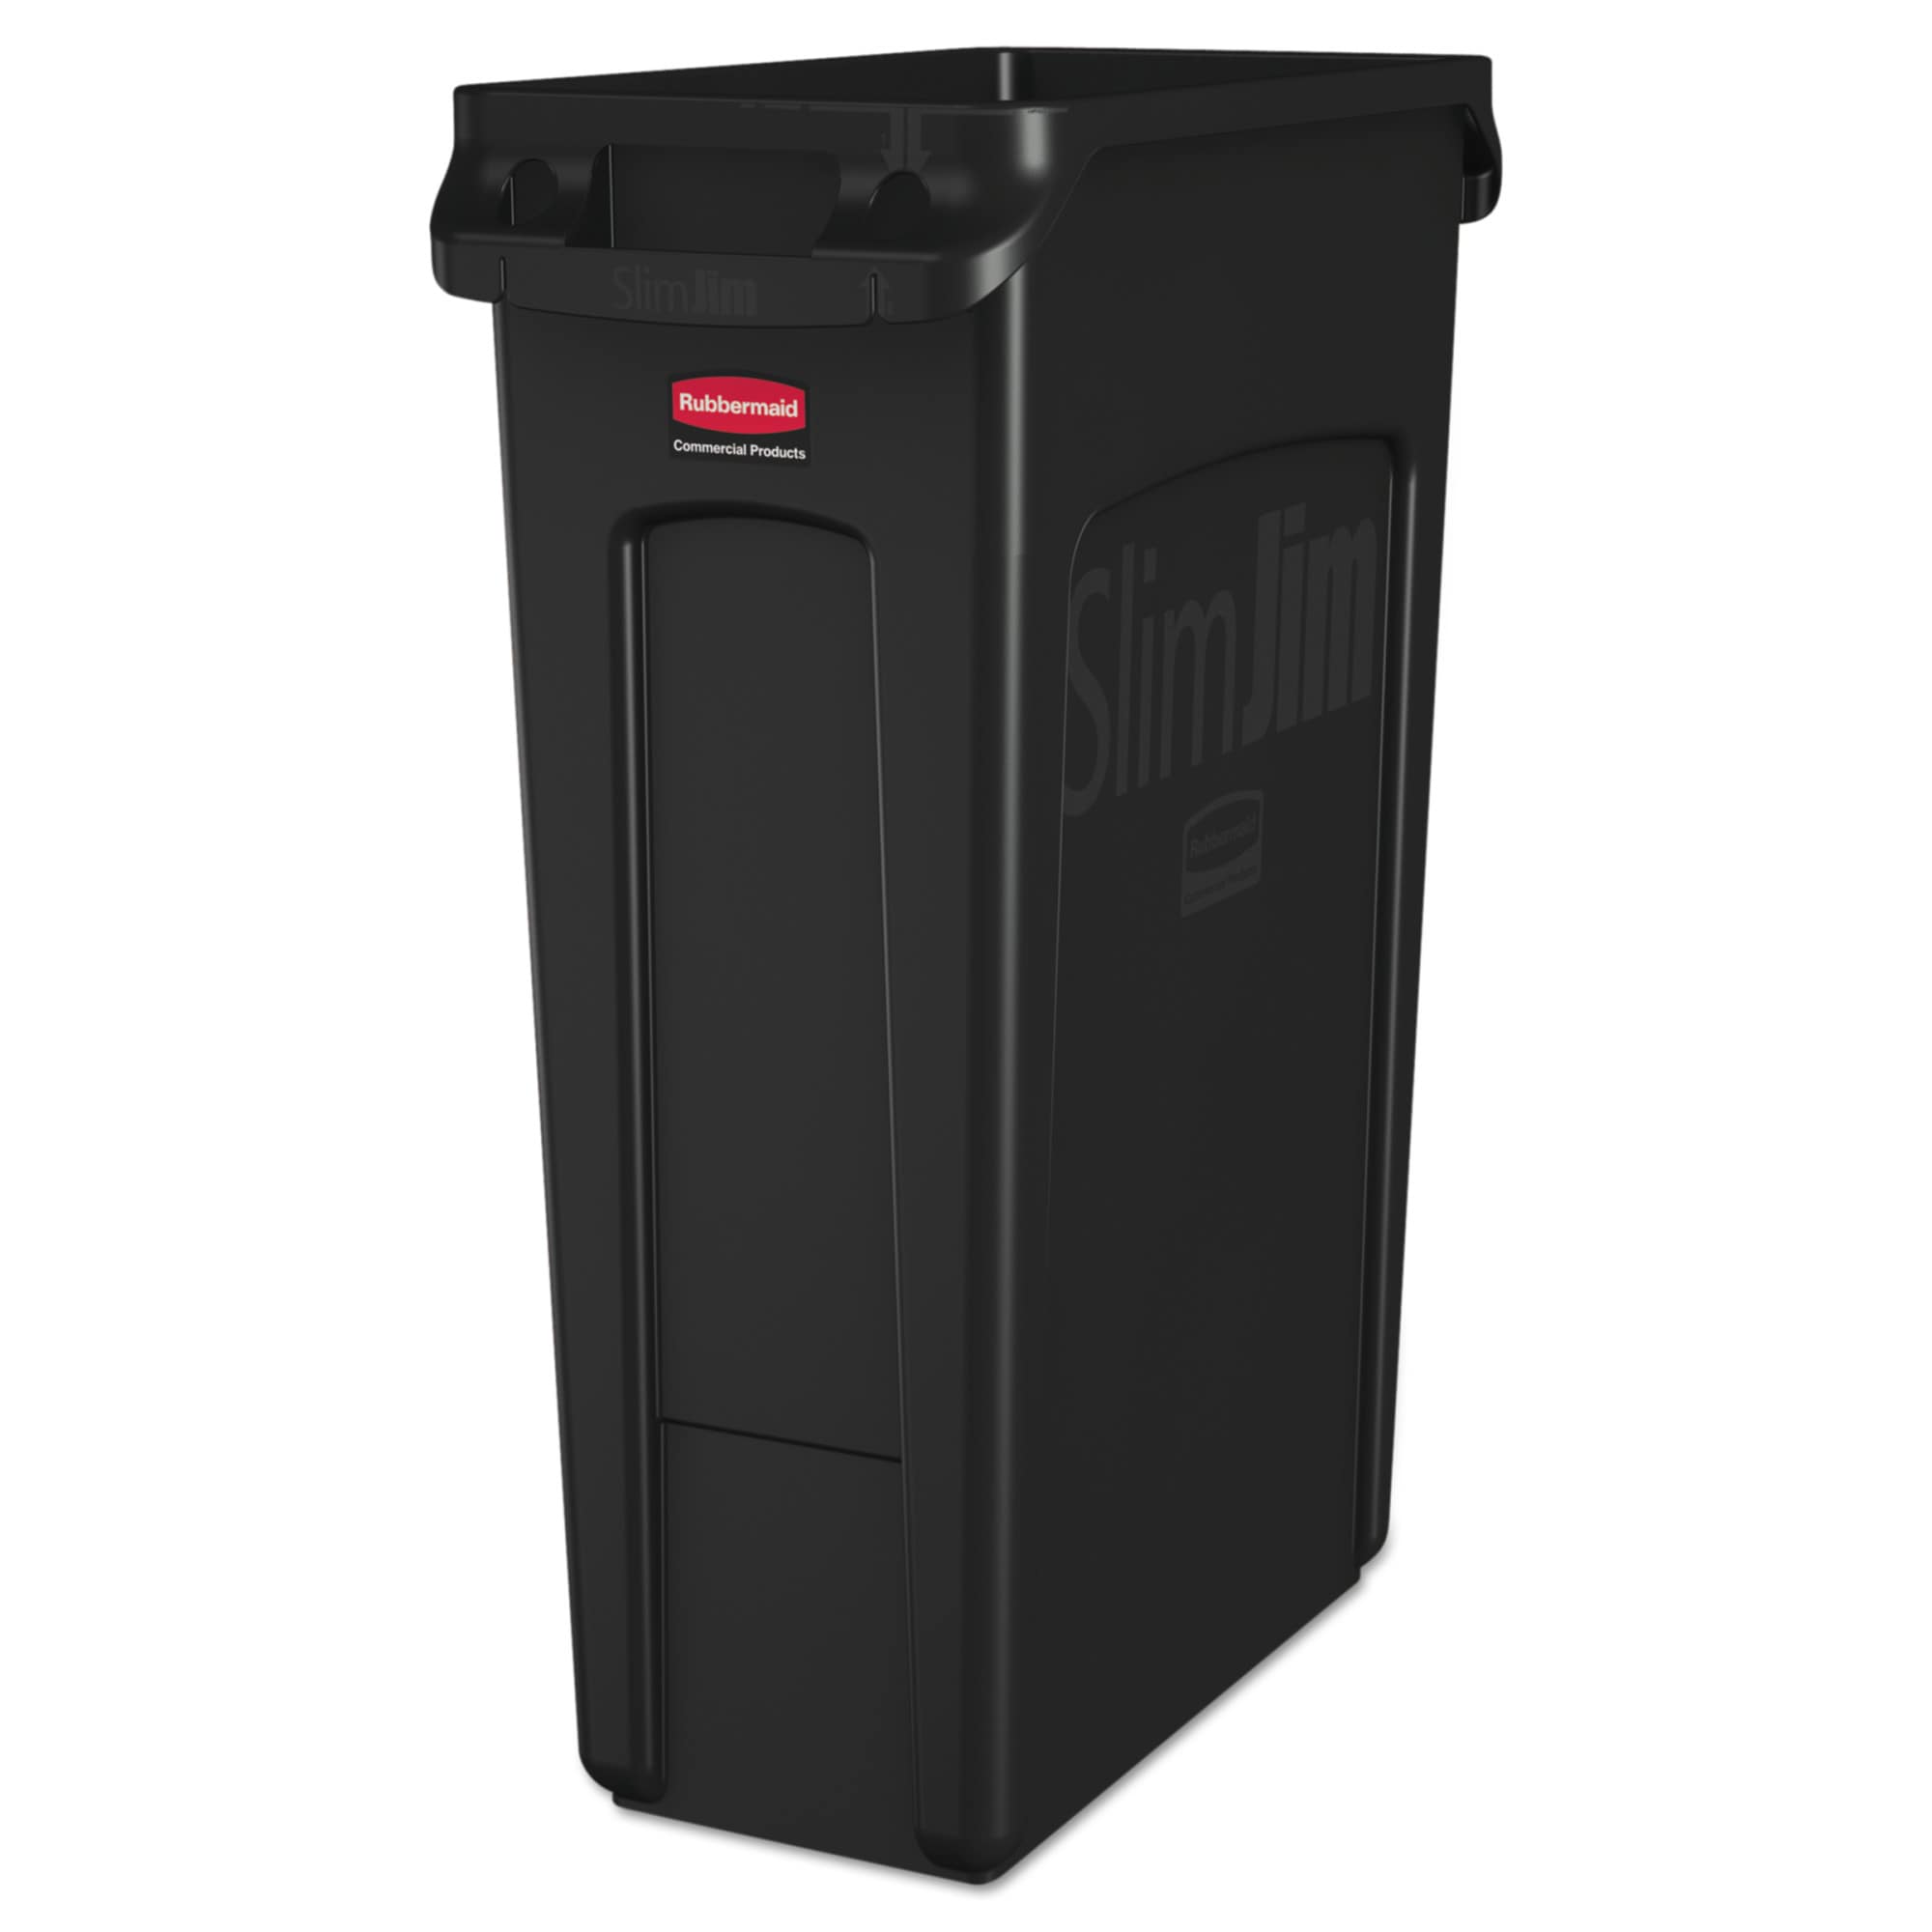 23 Gallon Skinny Plastic Home & Office Trash Can or Recycling Bin (4 Colors)